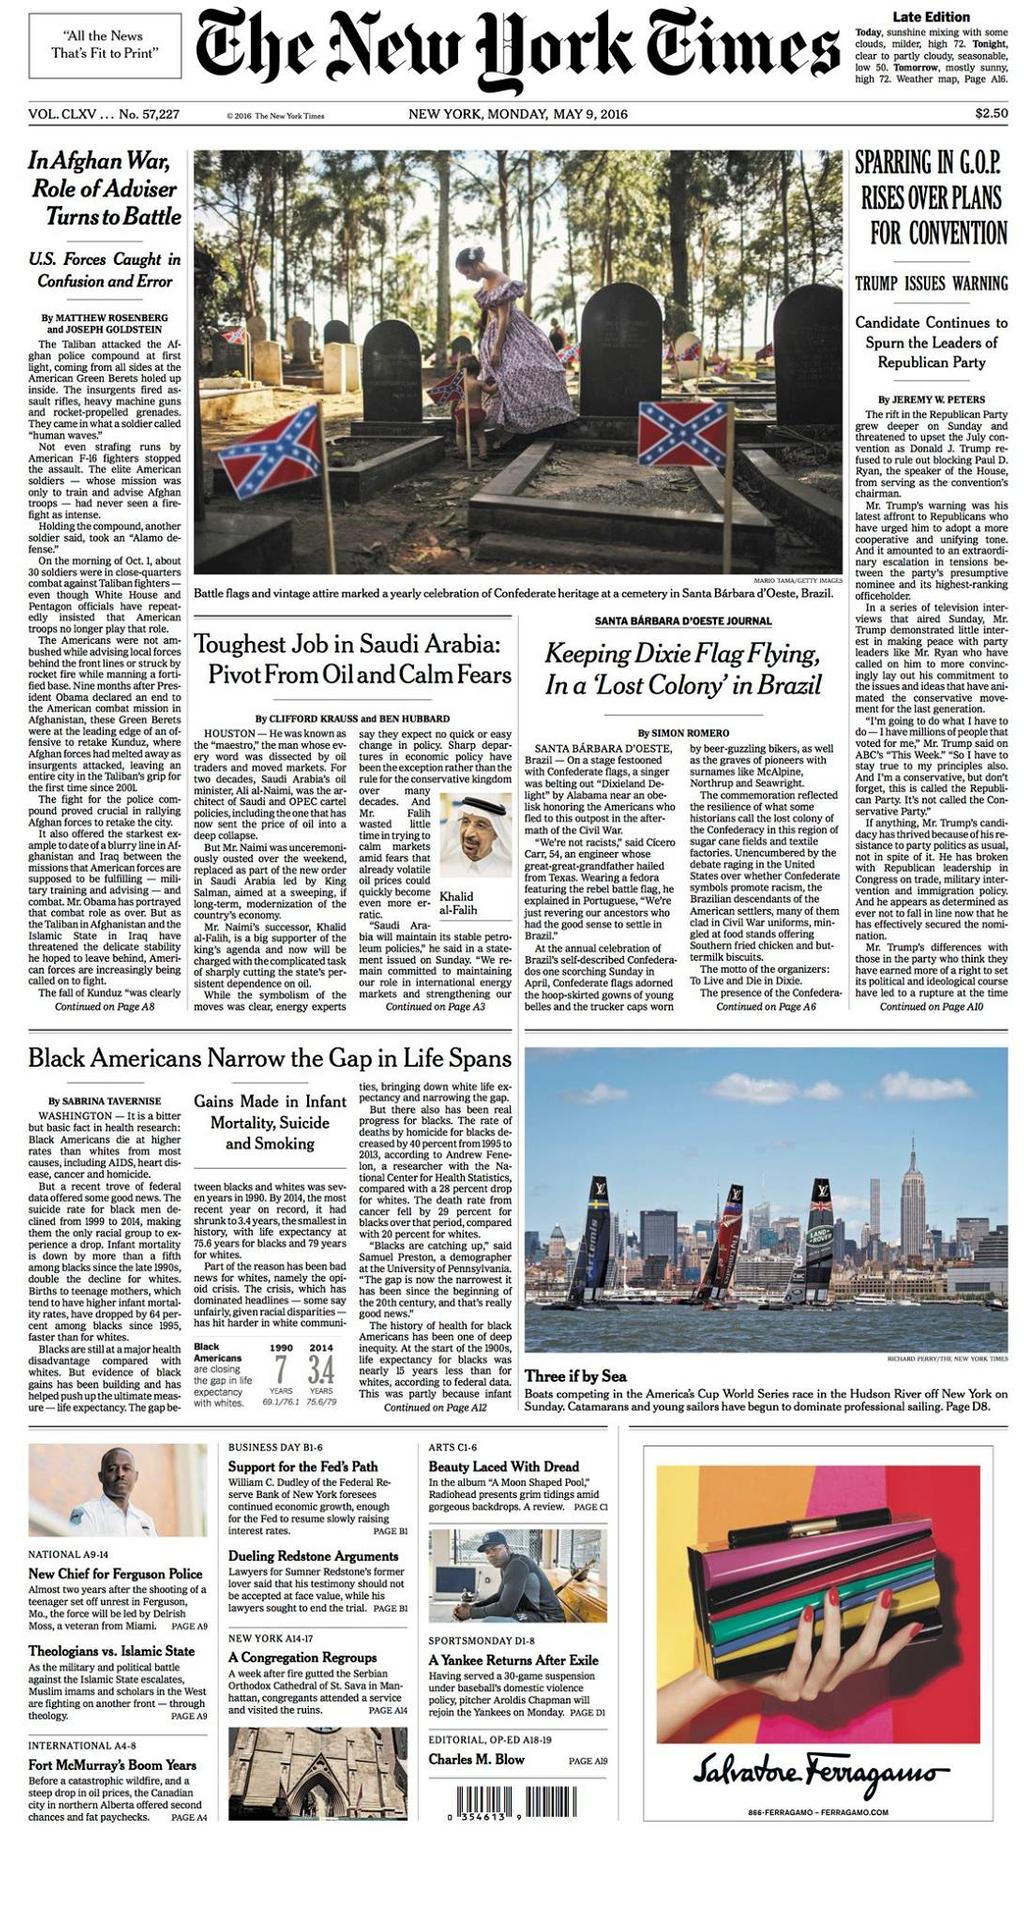 Front Page - New York Times, Monday May 9, 2016 - Louis Vuitton America's Cup World Series New York © Emirates Team New Zealand http://www.etnzblog.com